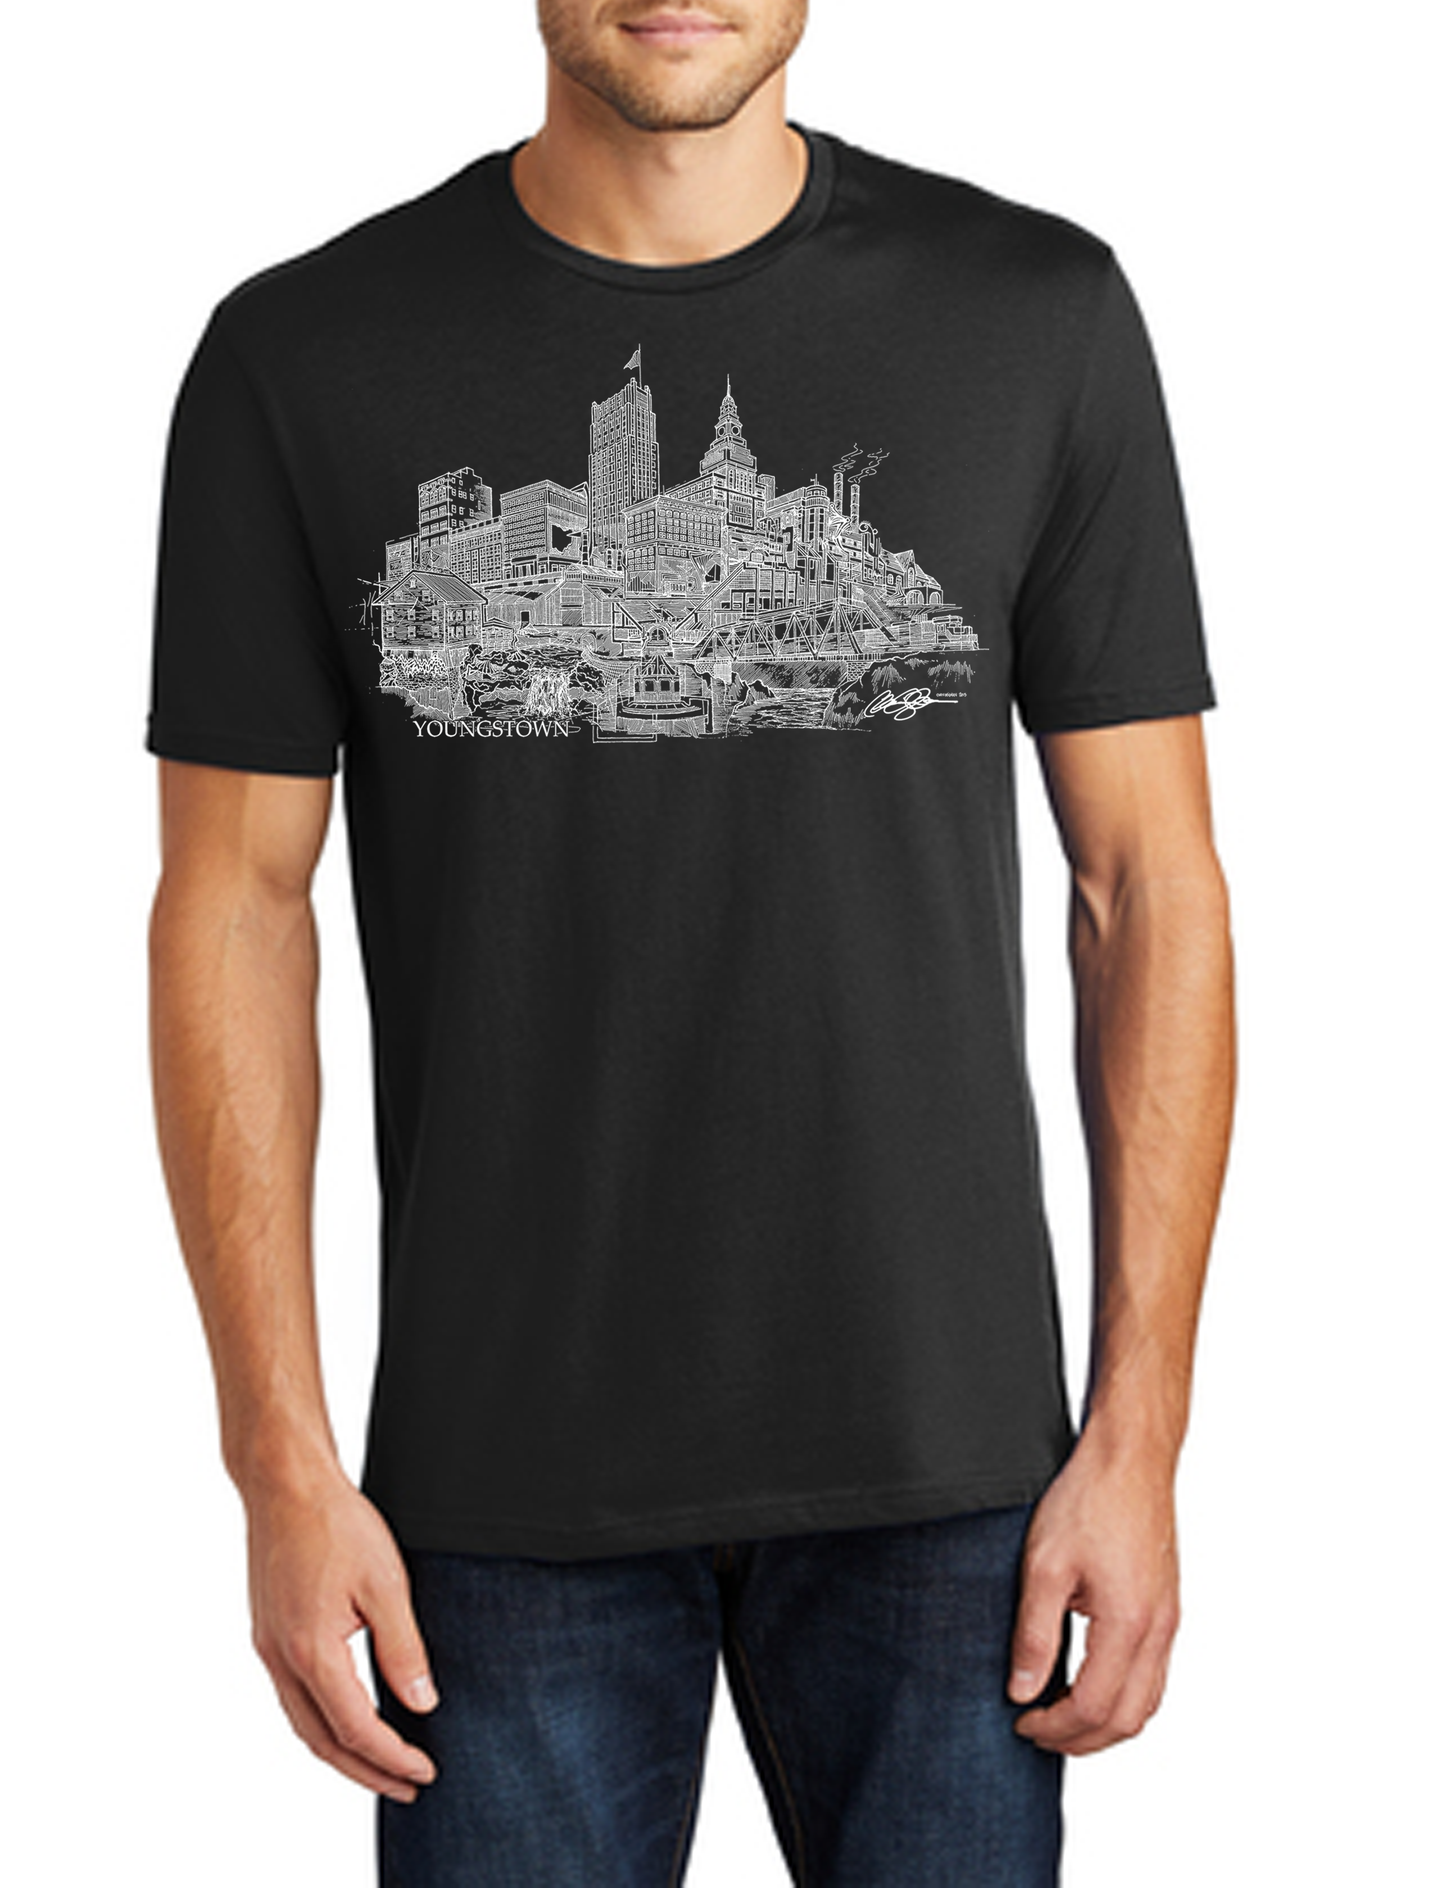 Youngstown T-Shirt (Multiple Options)